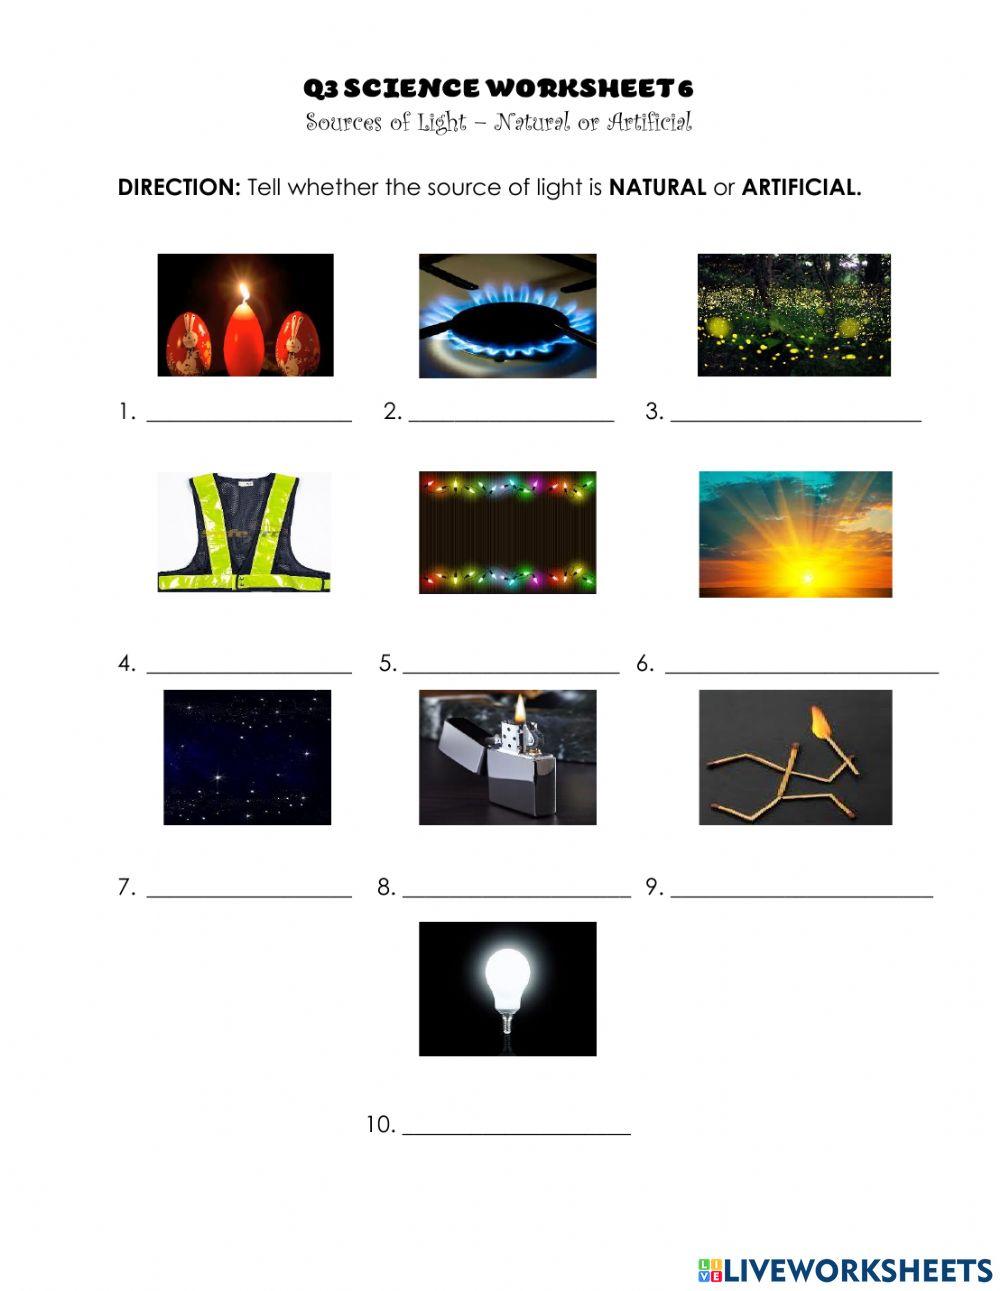 Q3 Science 4 Worksheet 6 Sources of Light - Natural or Artificial